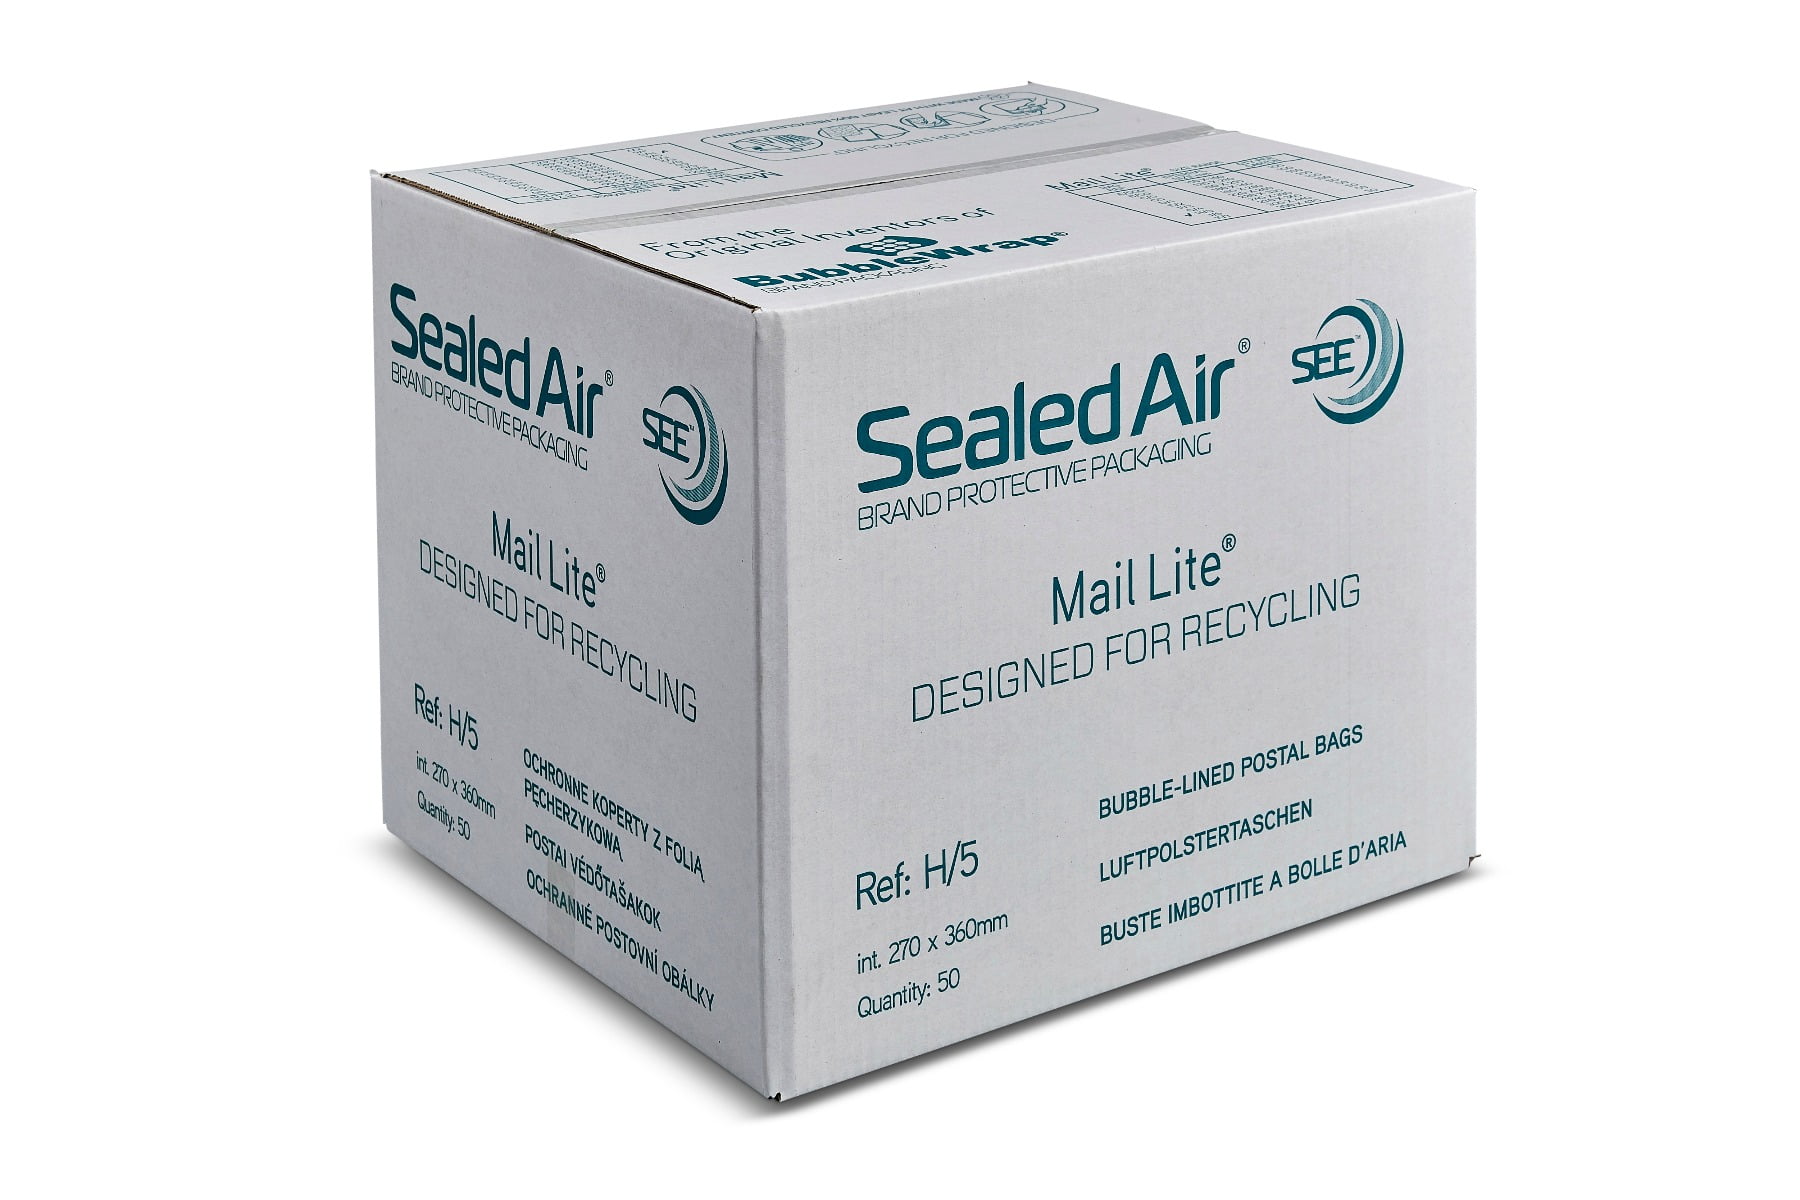 sealed air maillite bubble lined envelopes, protective packaging